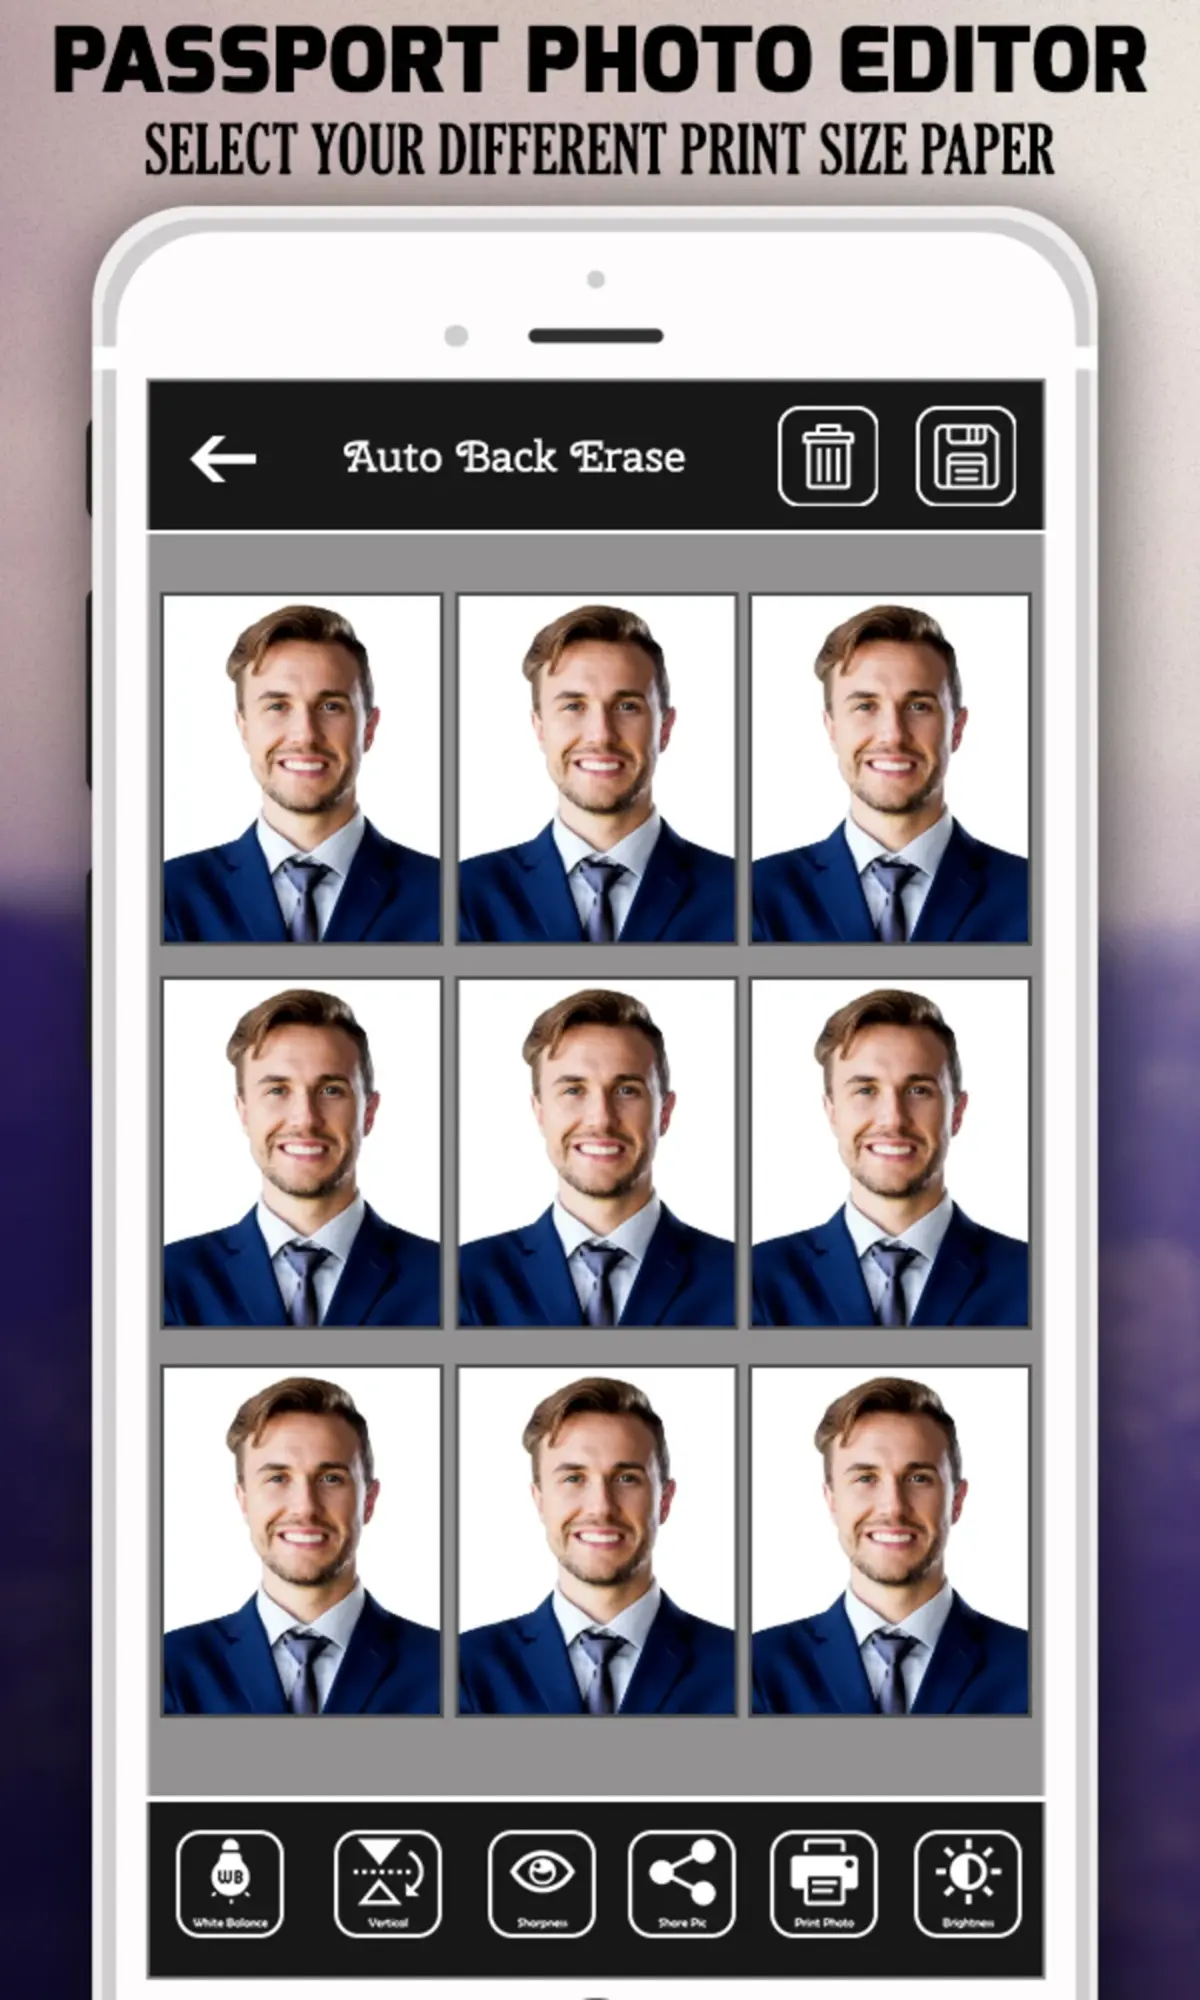 How to make your own passport photos with apps on Android